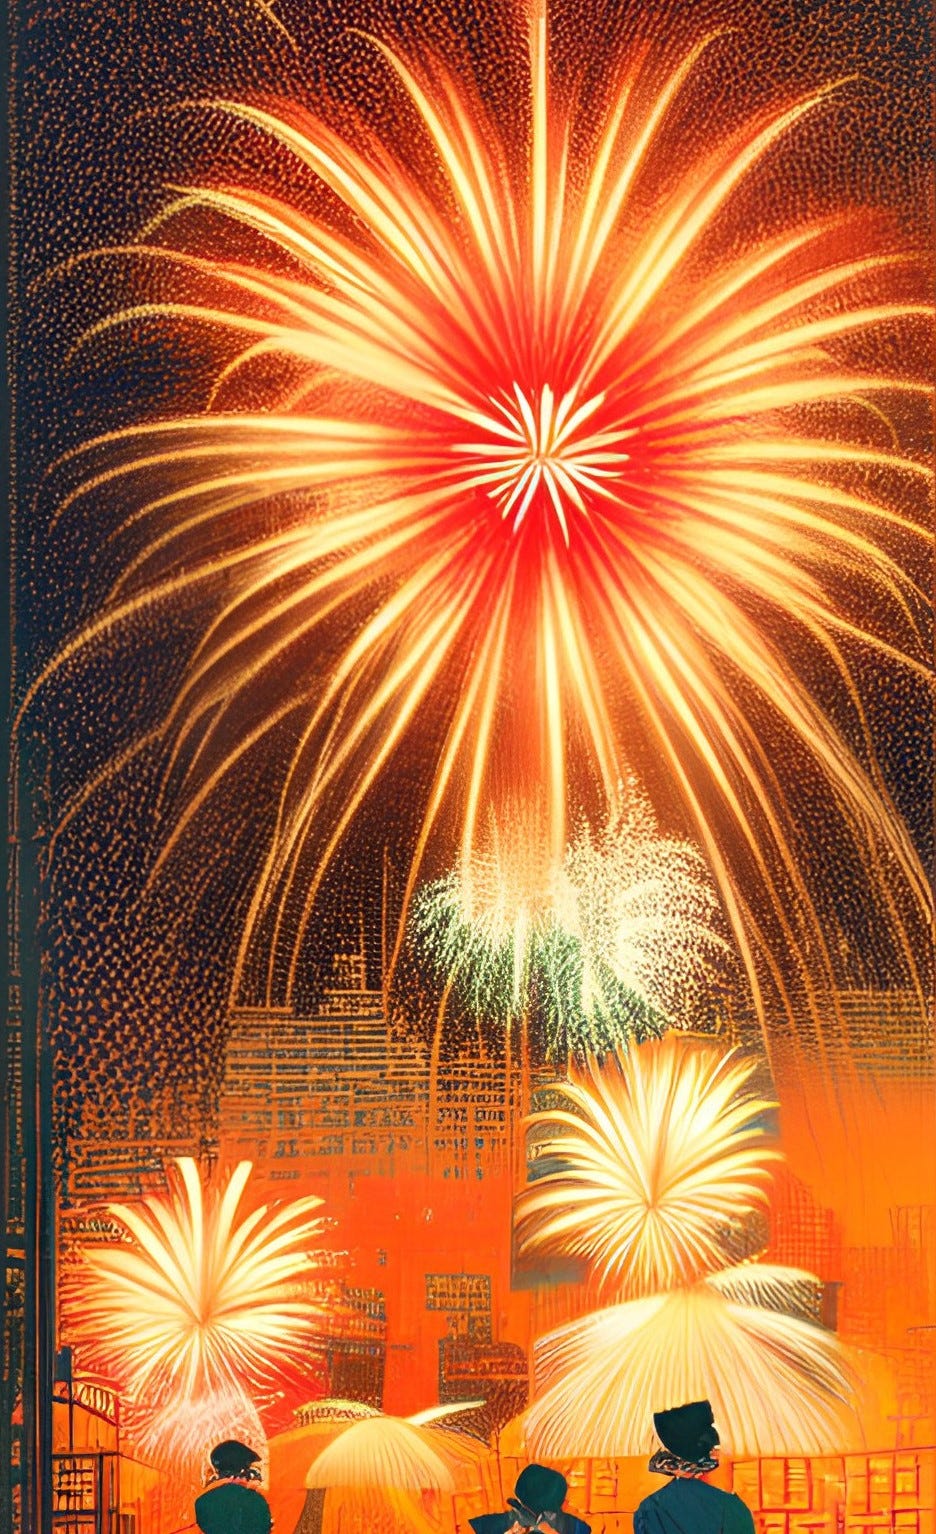 A.I. cartoon-style image of people watching fireworks